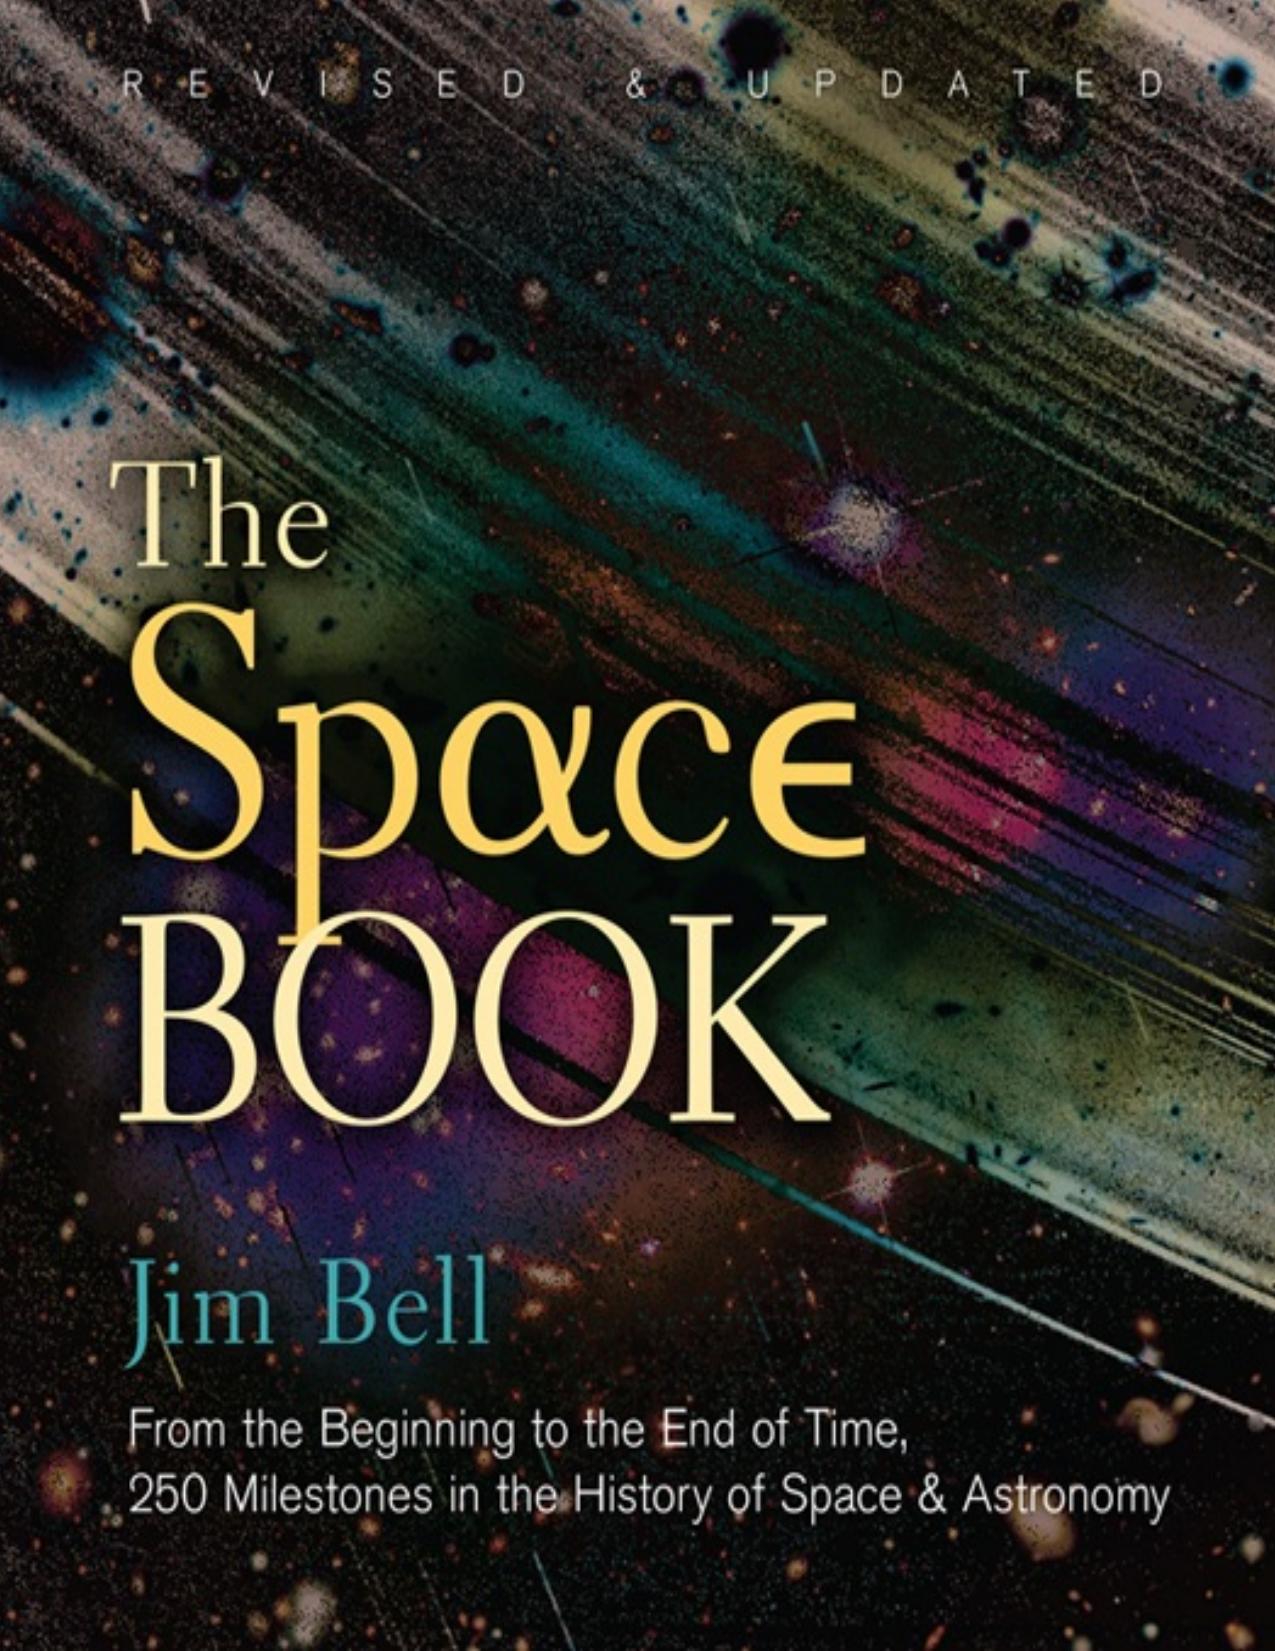 The Space Book Revised and Updated: From the Beginning to the End of Time, 250 Milestones in the History of Space \& Astronomy - PDFDrive.com